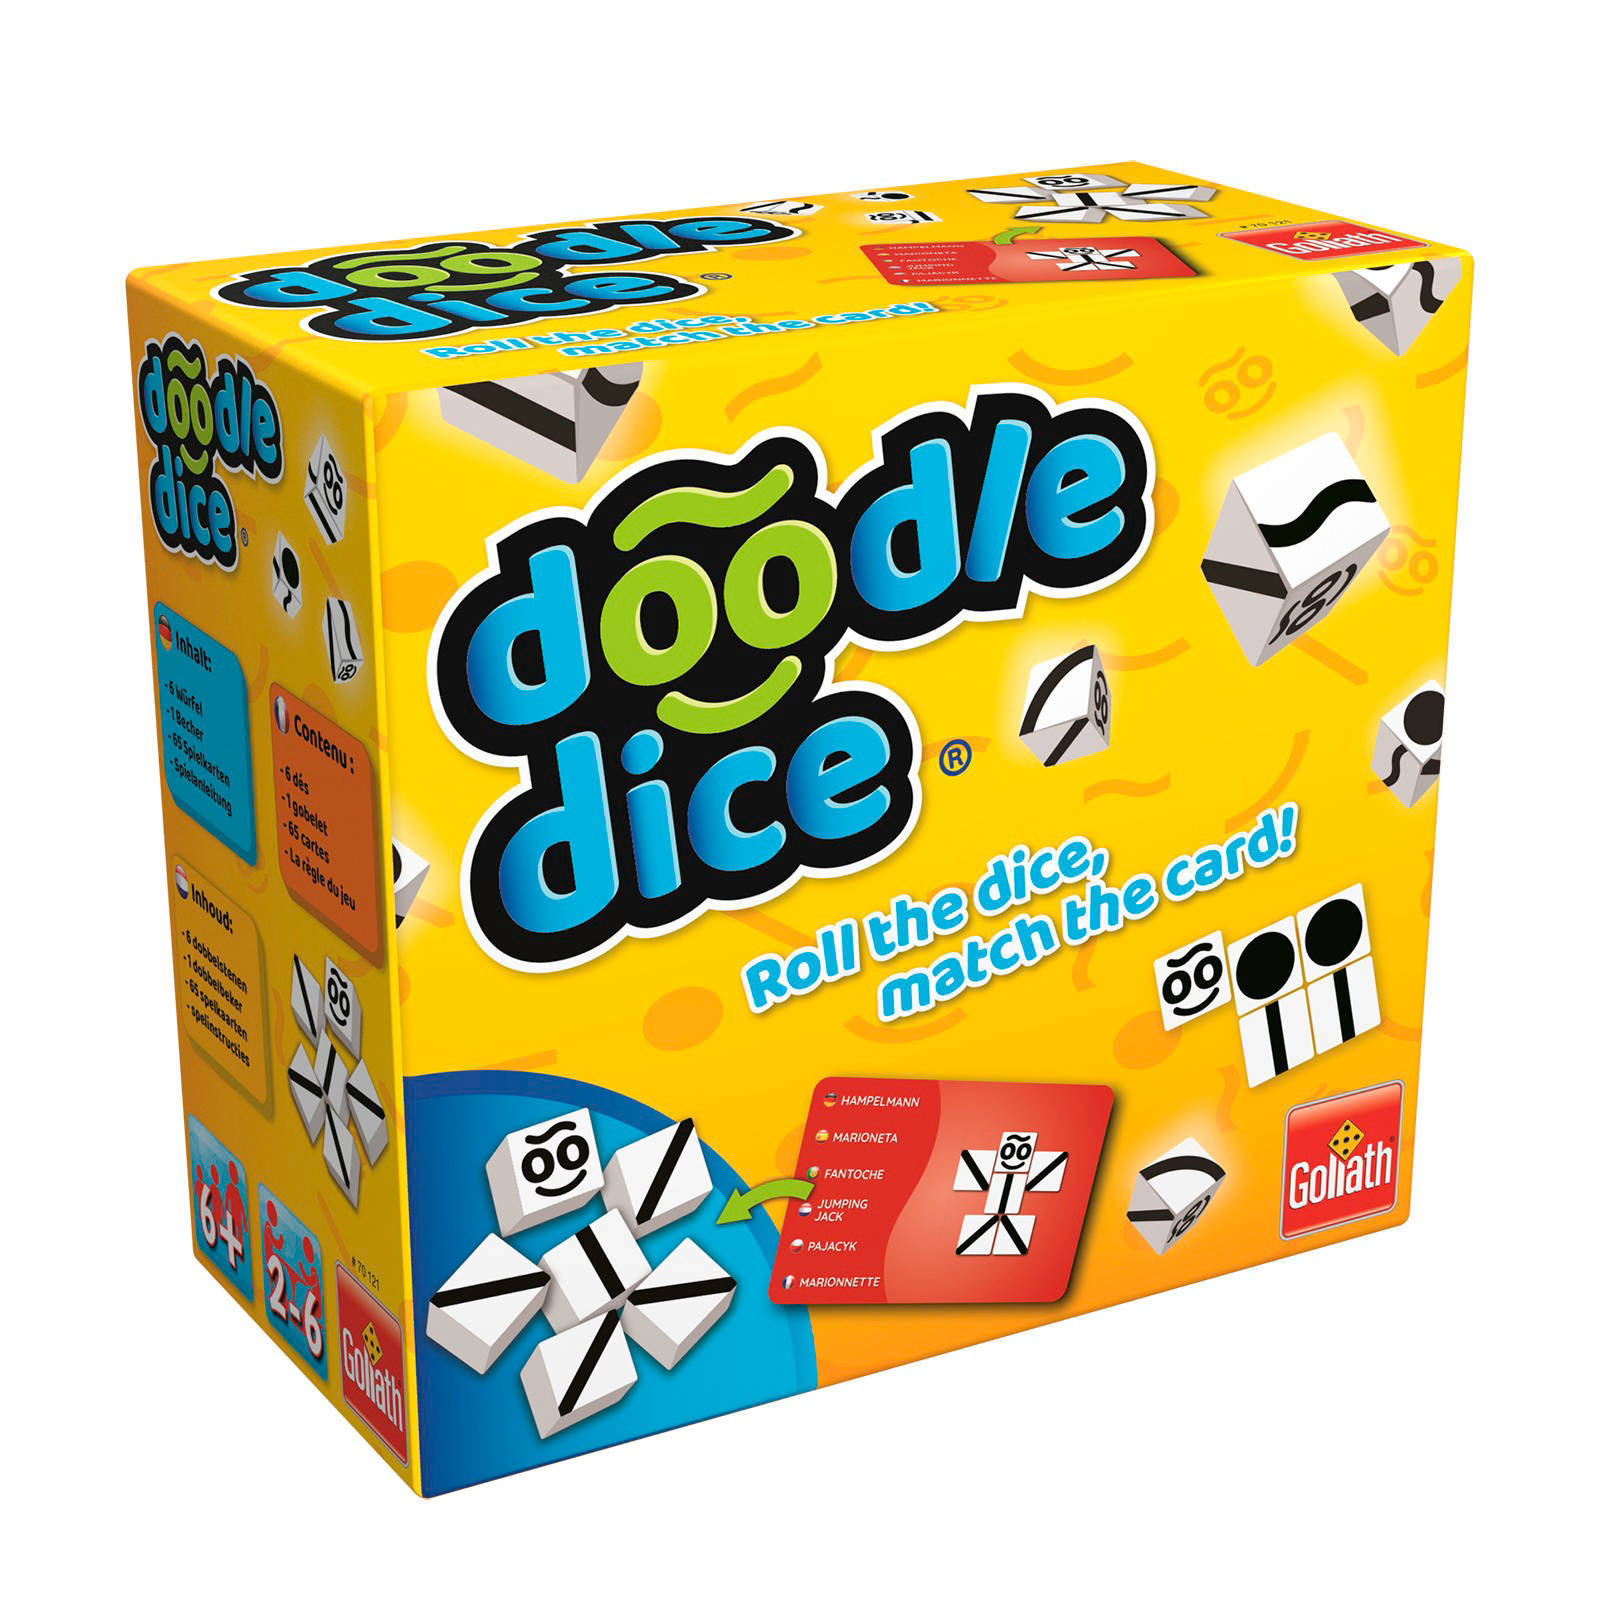 Goliath Doodle Dice Roll The Match The Card Familiespel - Eerstspeelgoed.nl